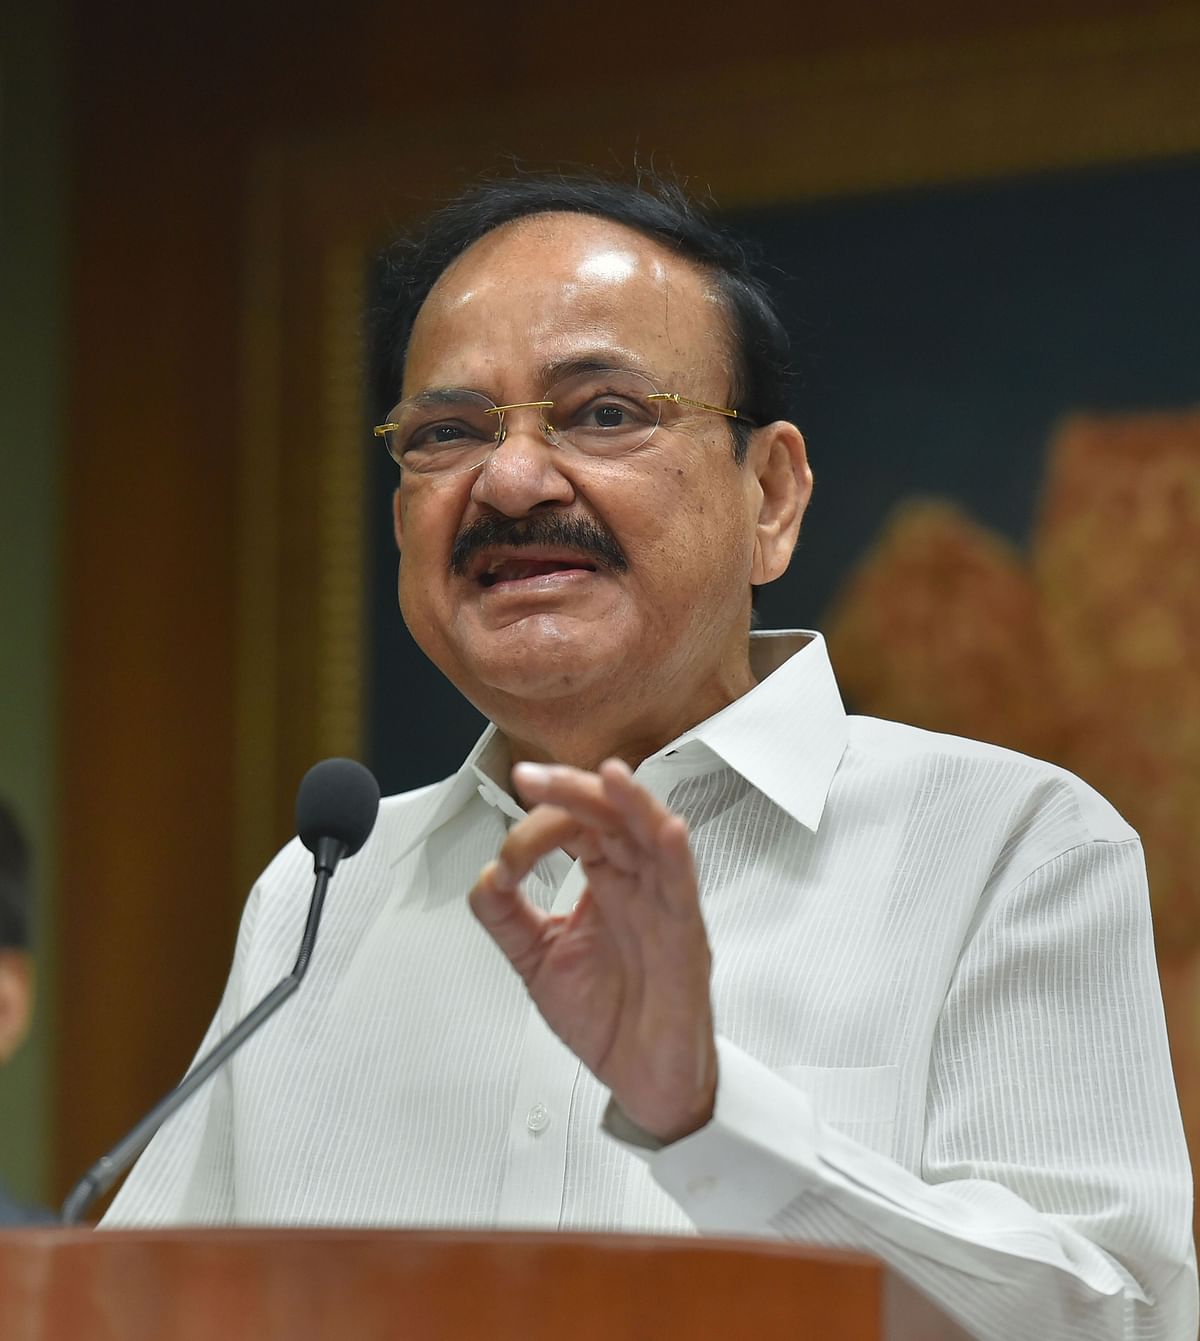 Yoga not a religion or political activity, but a science, says Vice President Venkaiah Naidu